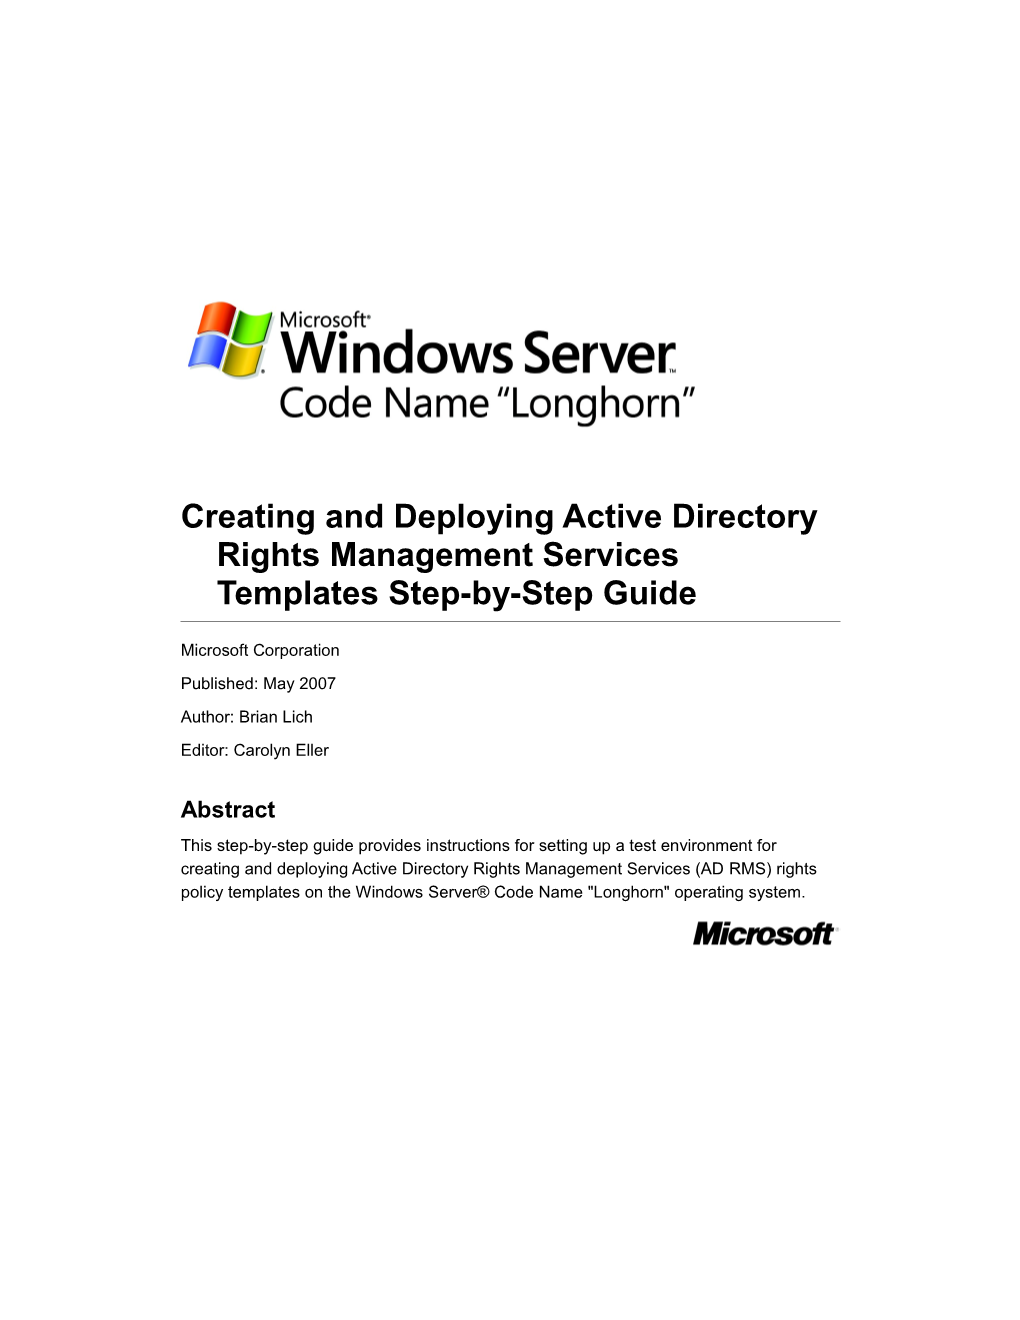 Creating and Deploying Active Directory Rights Management Services Templates Step-By-Step Guide